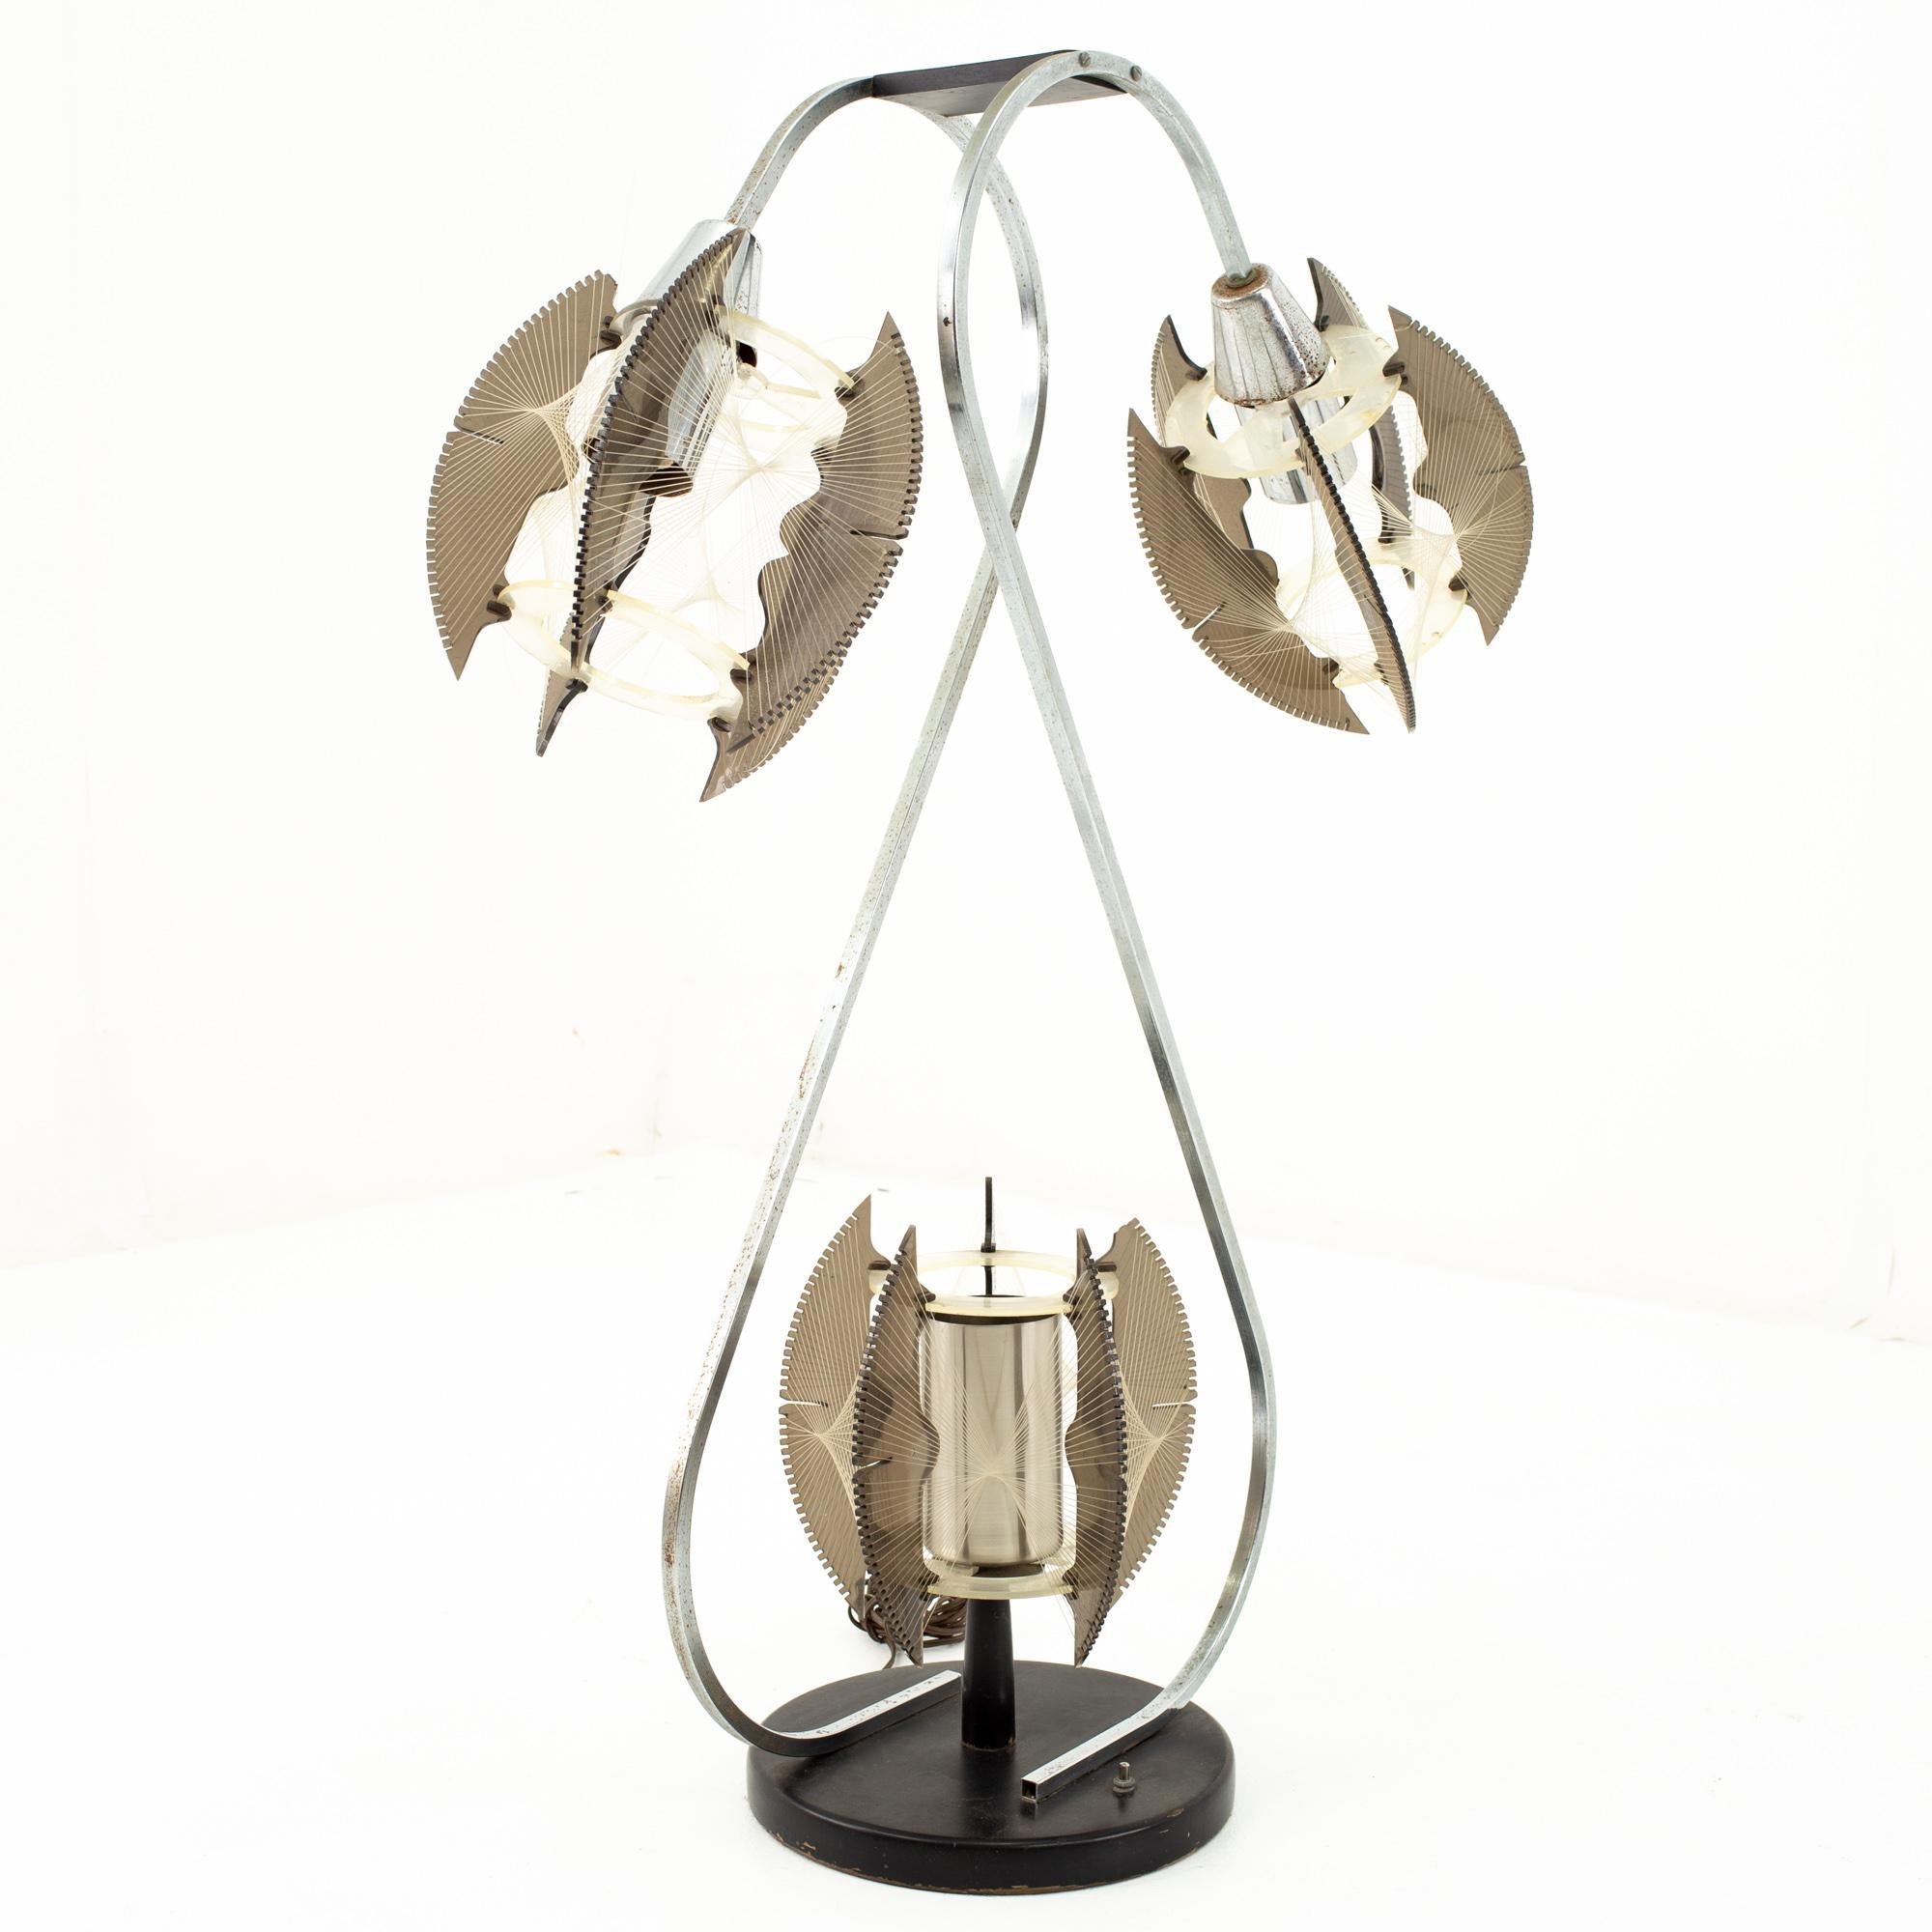 Paul Secon for Sompex Mid Century string and chrome lamp
Lamp measures: 28 wide x 12 deep x 41.5 high

This price includes getting this piece in what we call restored vintage condition. That means the piece is permanently fixed upon purchase so it’s